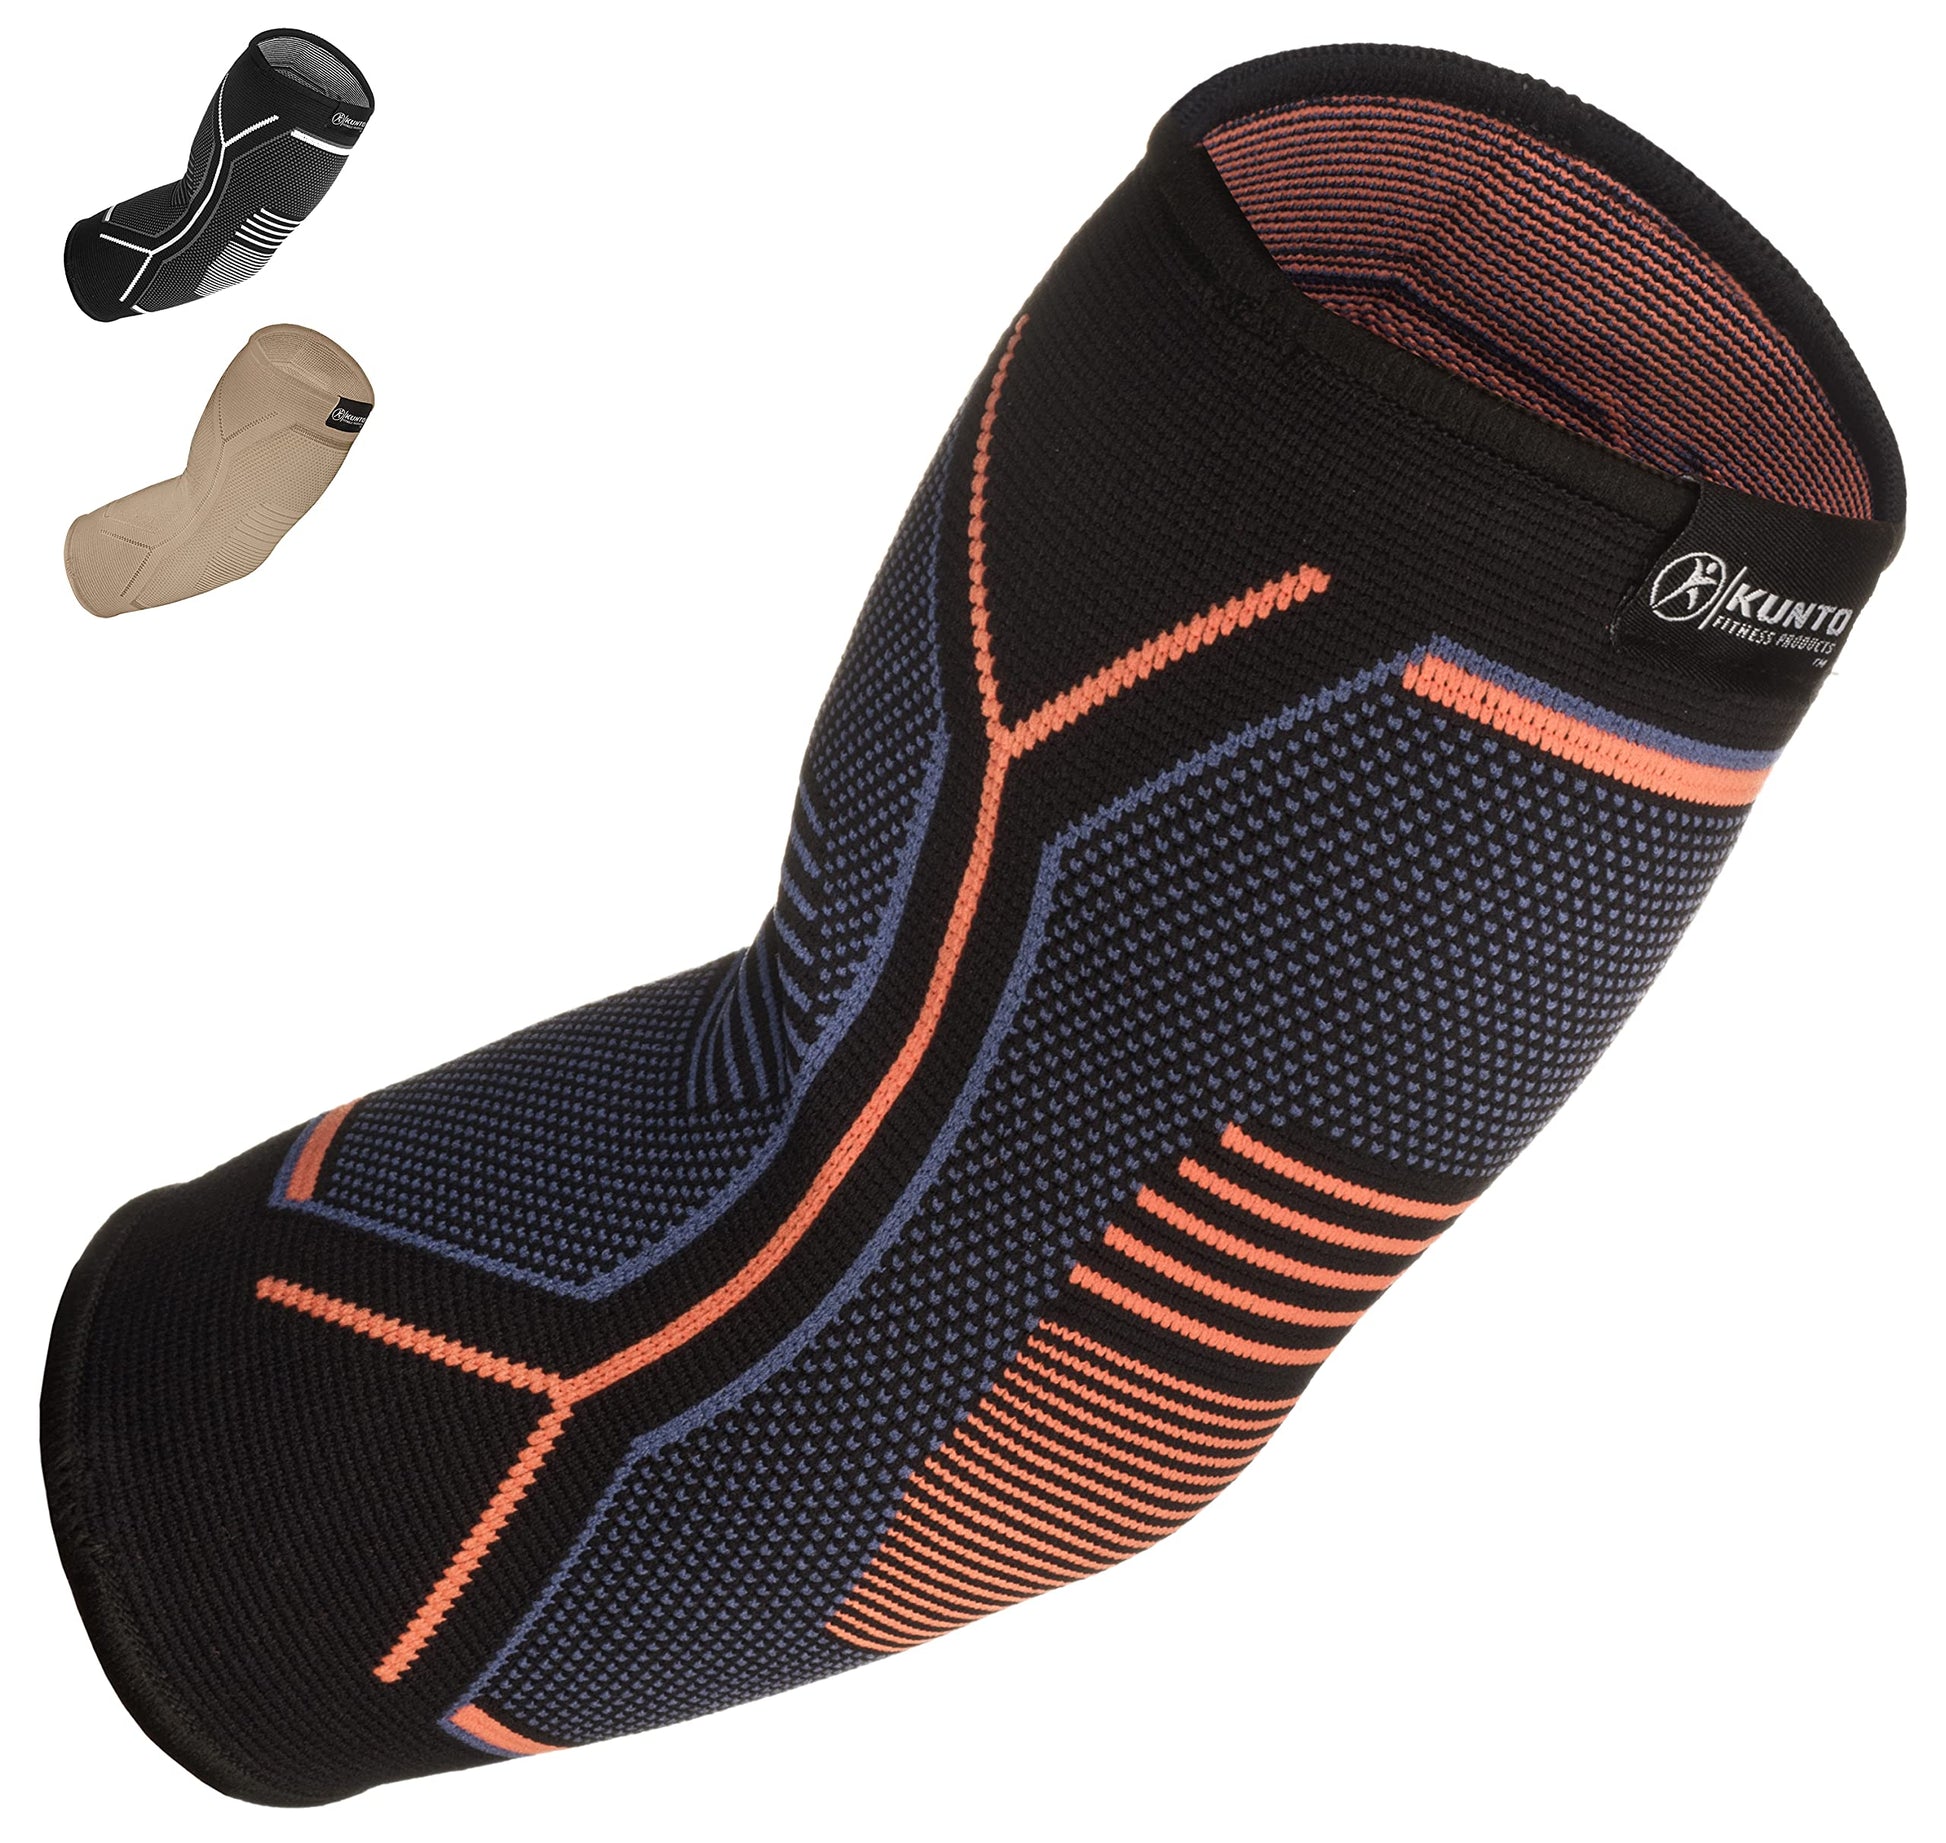 Kunto Fitness Elbow Brace Compression Support Sleeve for Tendonitis, Tennis - Opticdeals